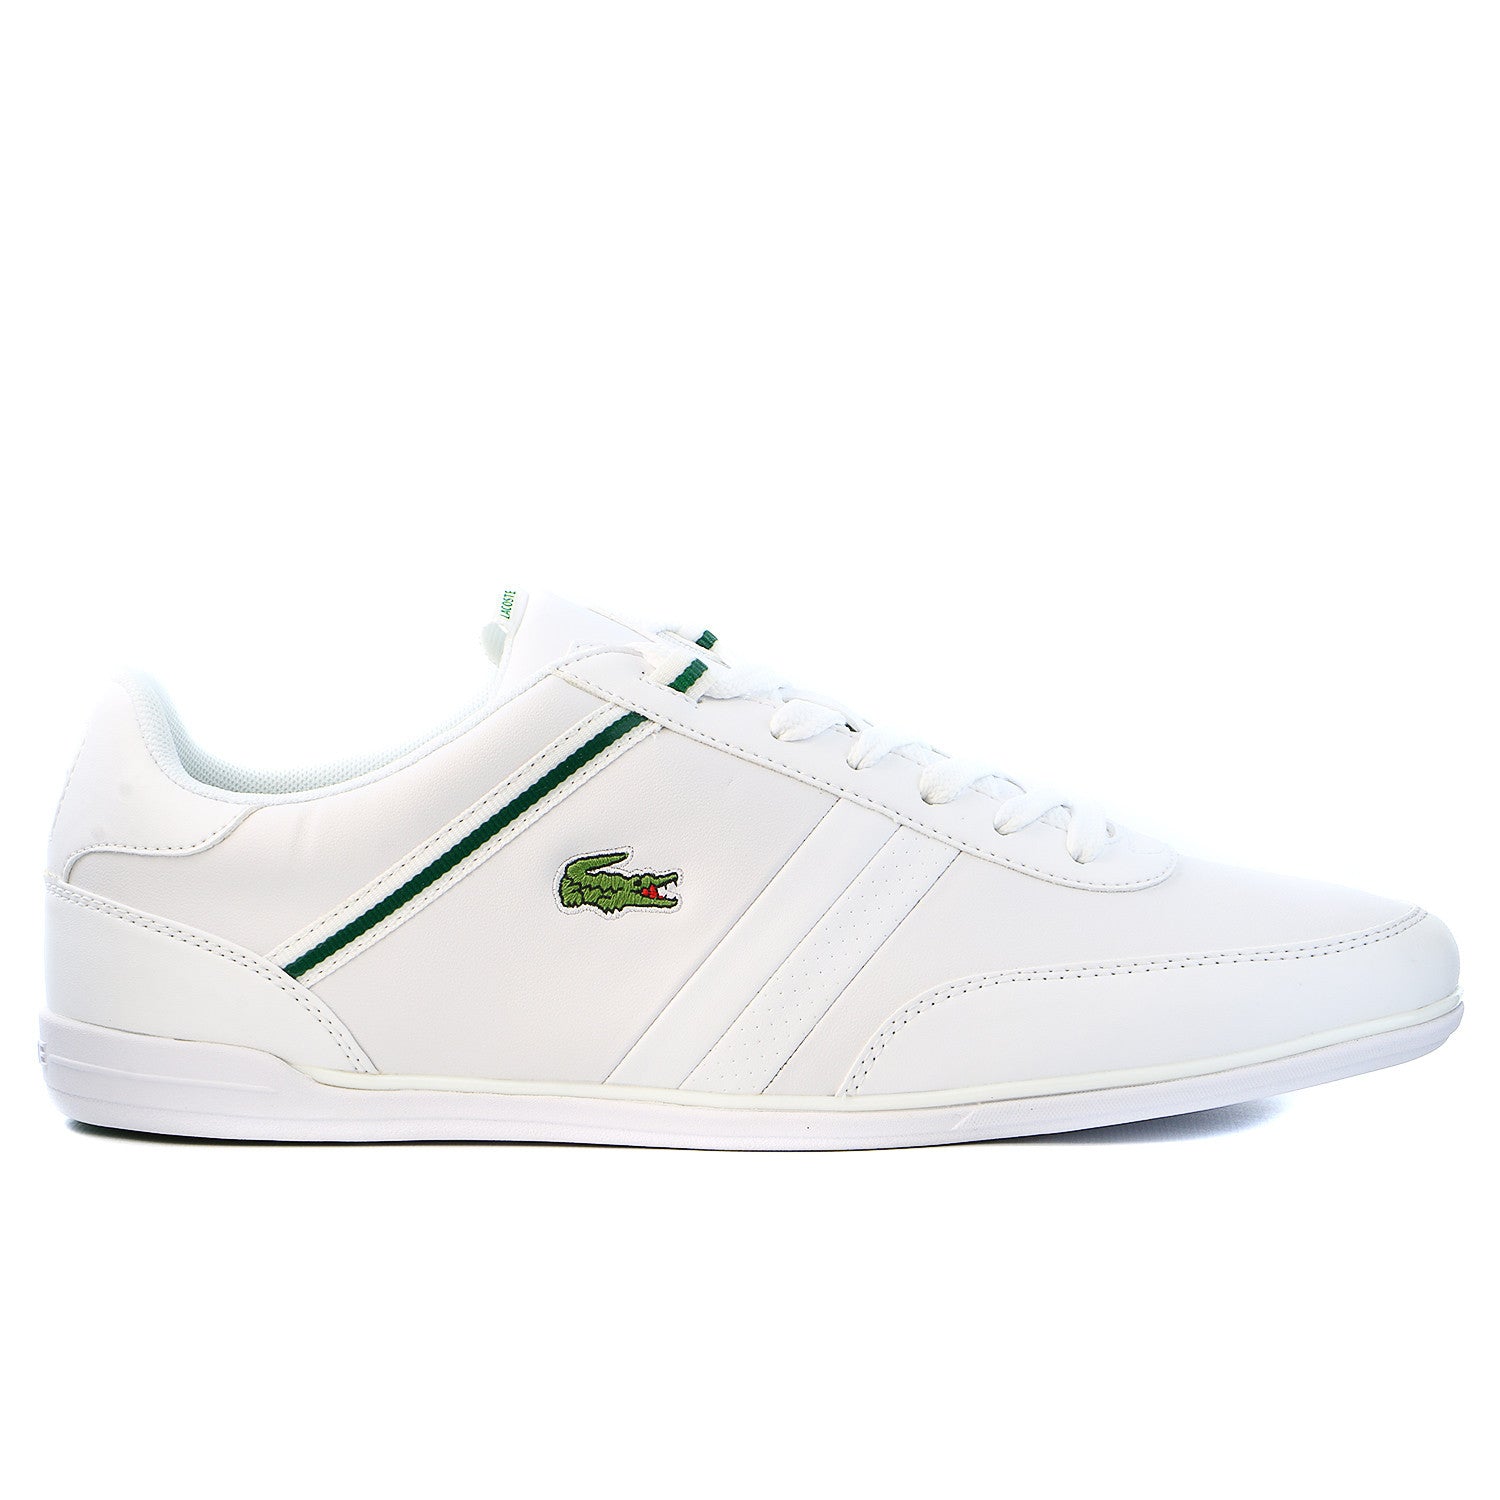 lacoste white and green sneakers